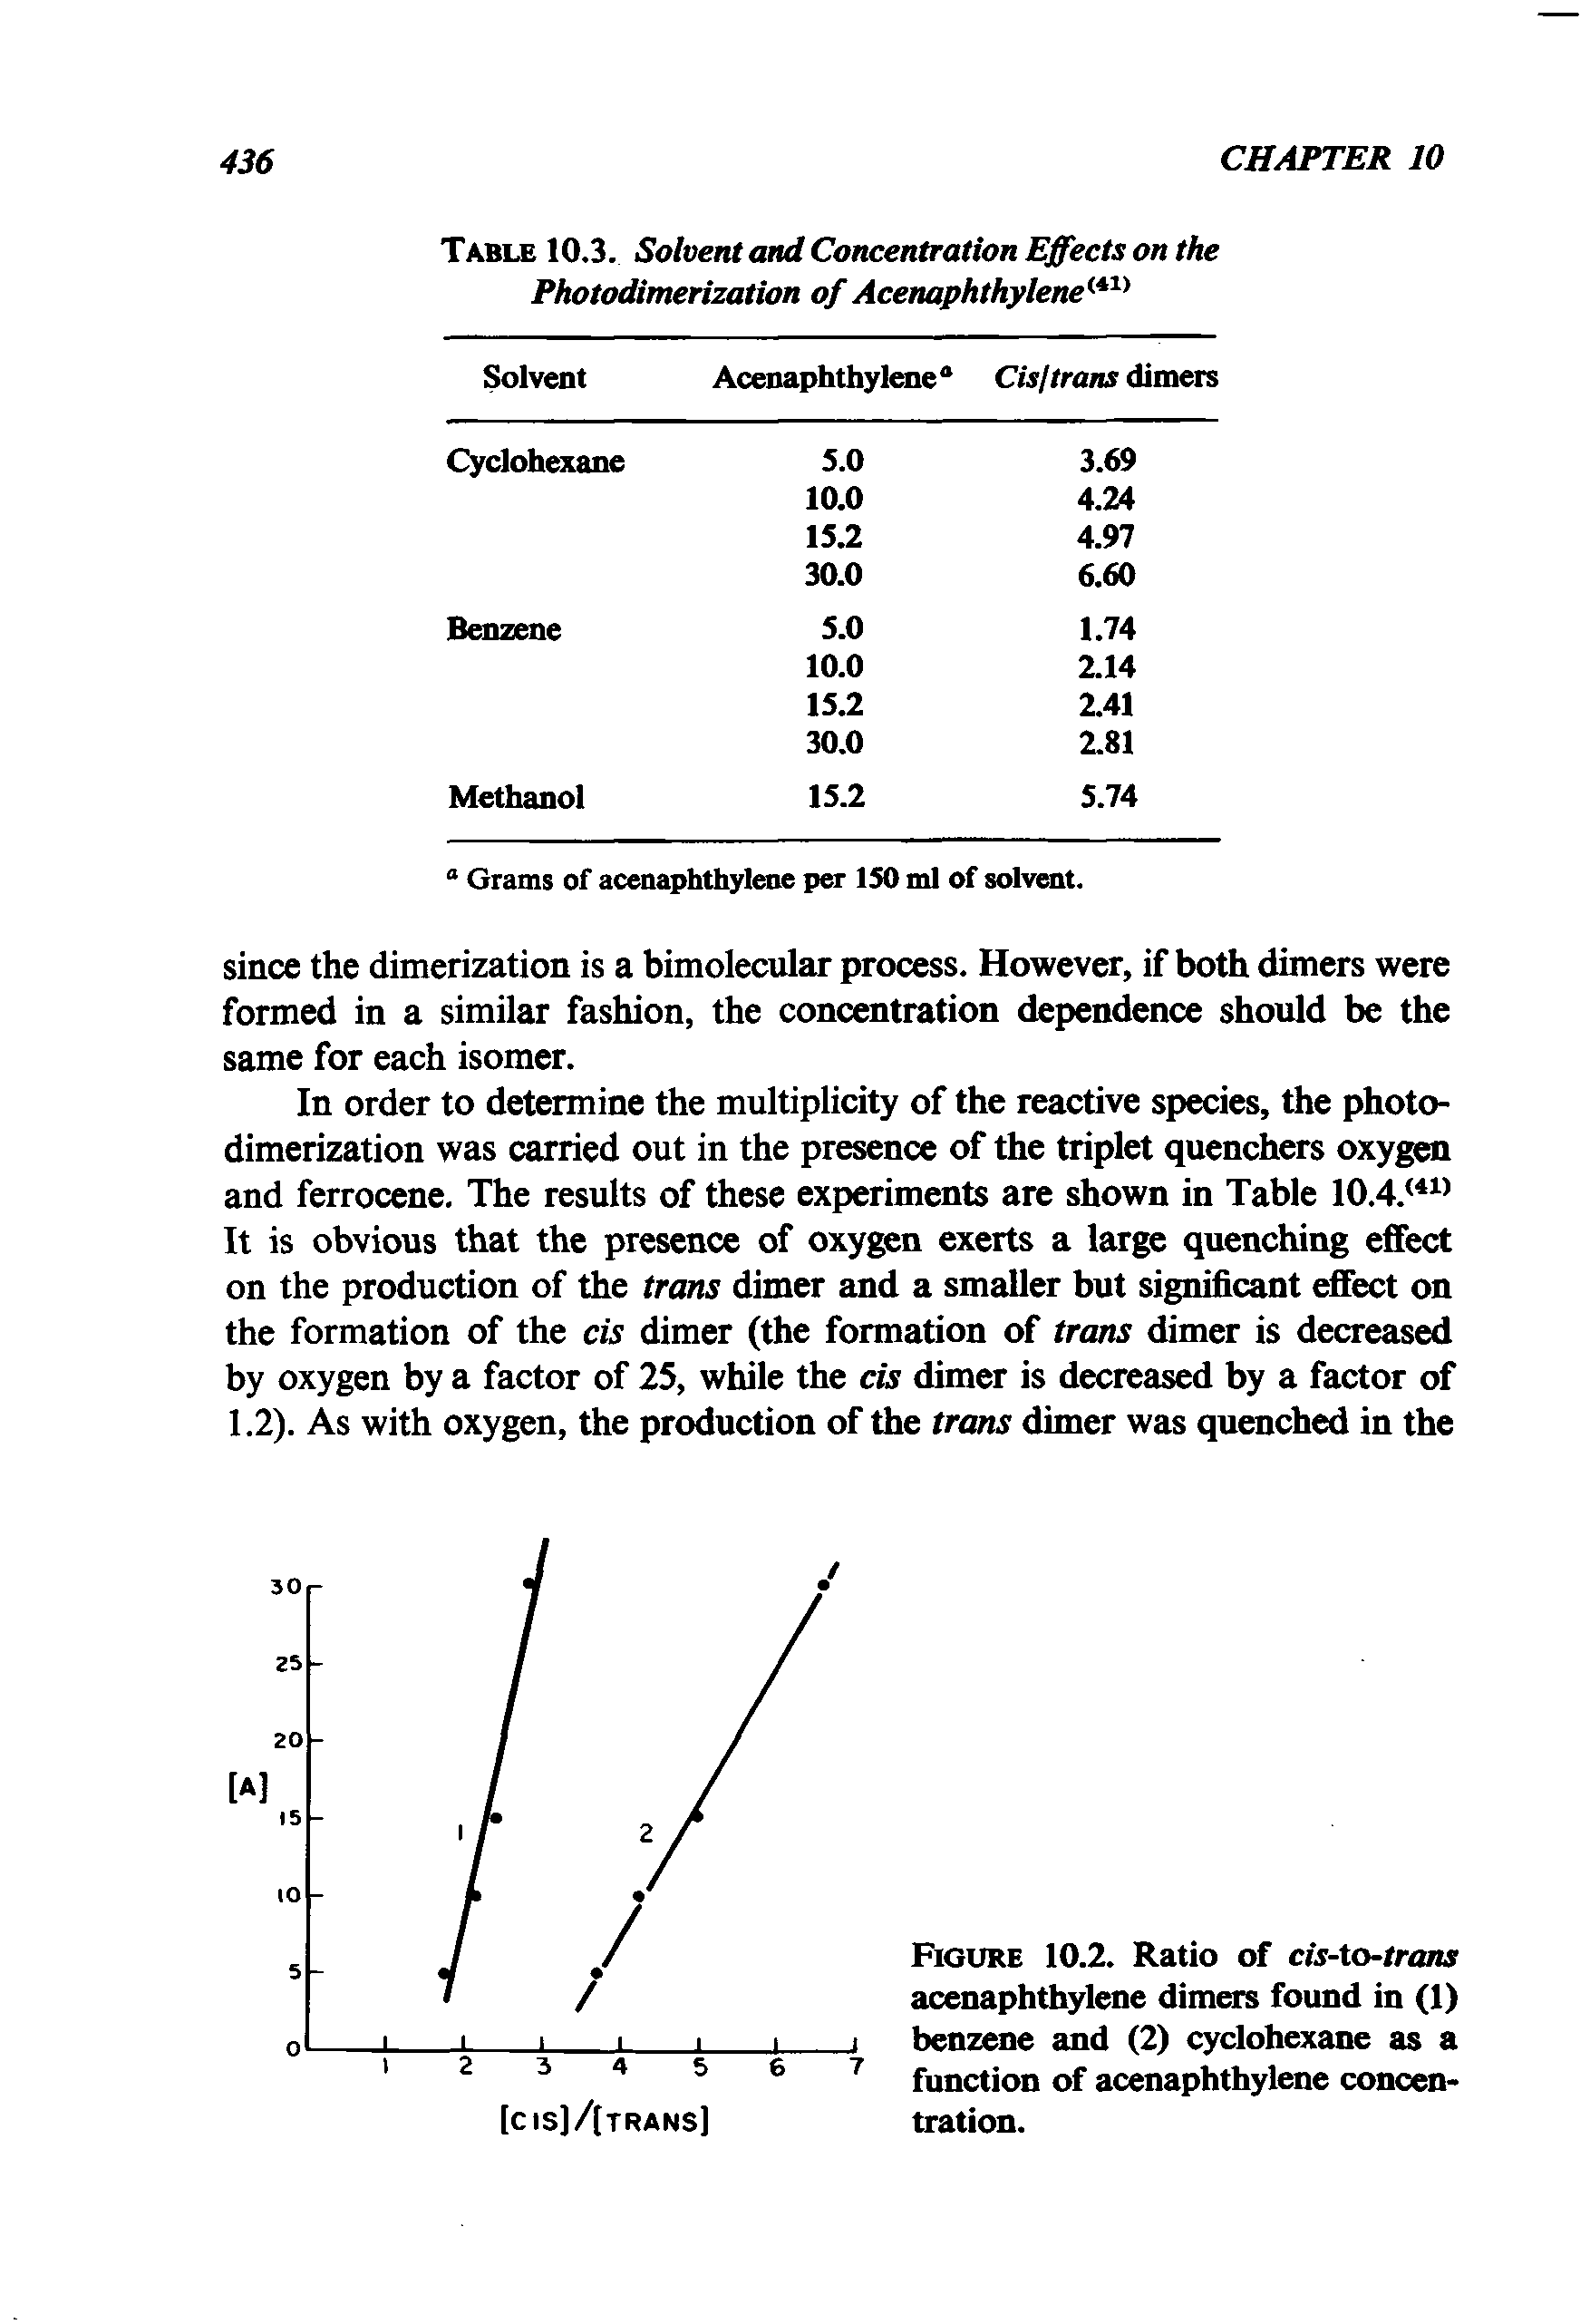 Table 10.3. Solvent and Concentration Effects on the Photodimerization of Acenaphthylene<41)...